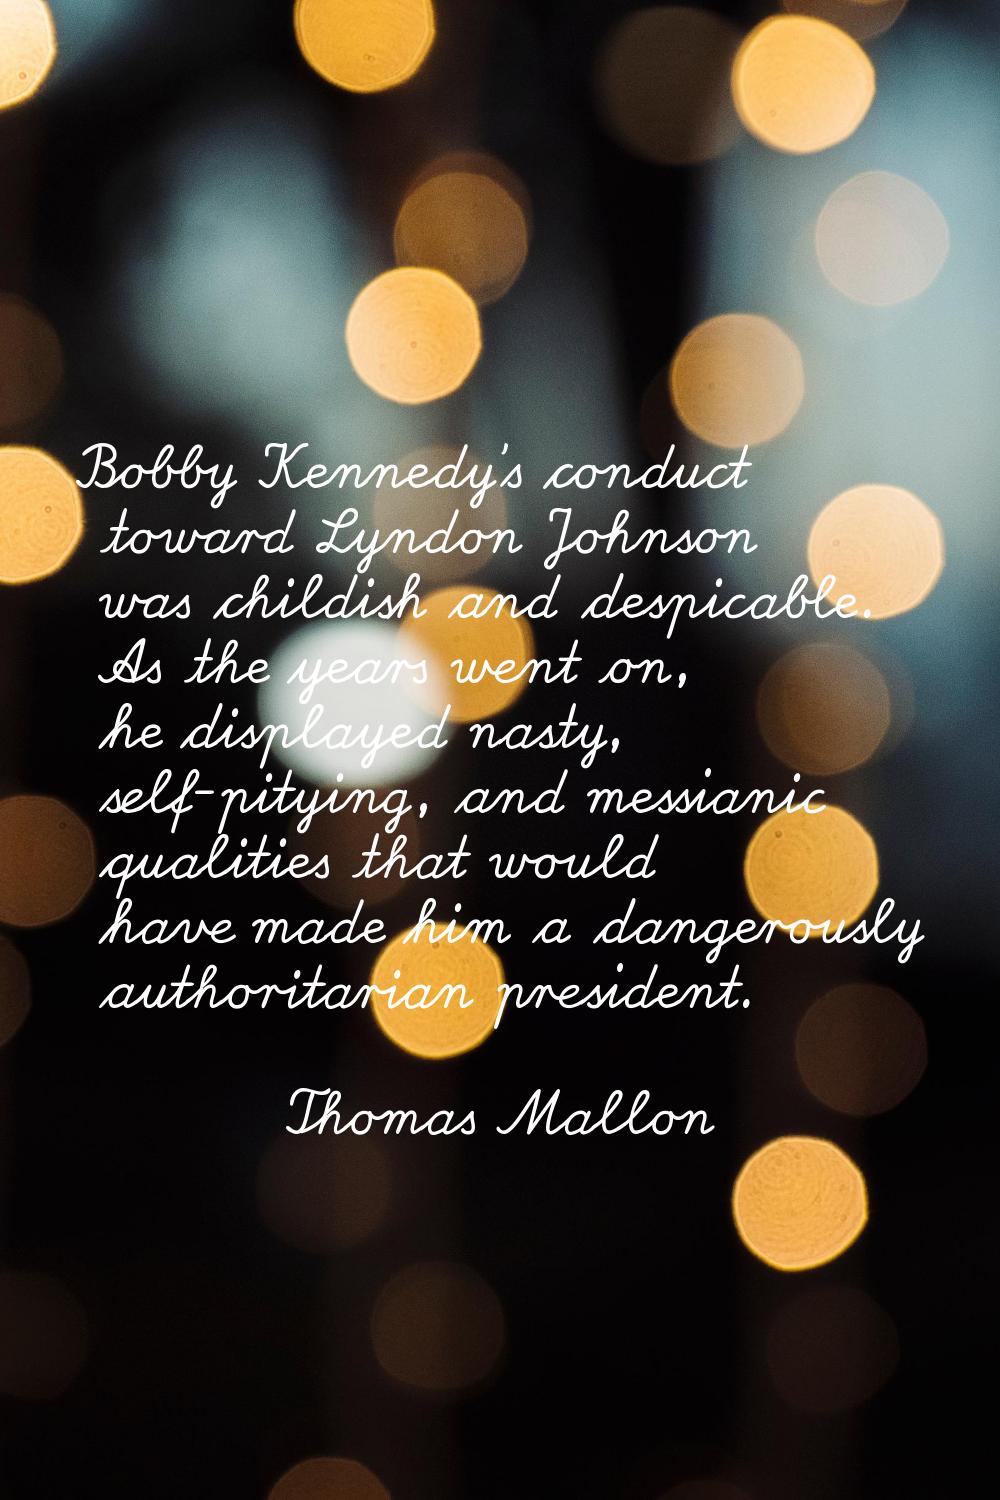 Bobby Kennedy's conduct toward Lyndon Johnson was childish and despicable. As the years went on, he